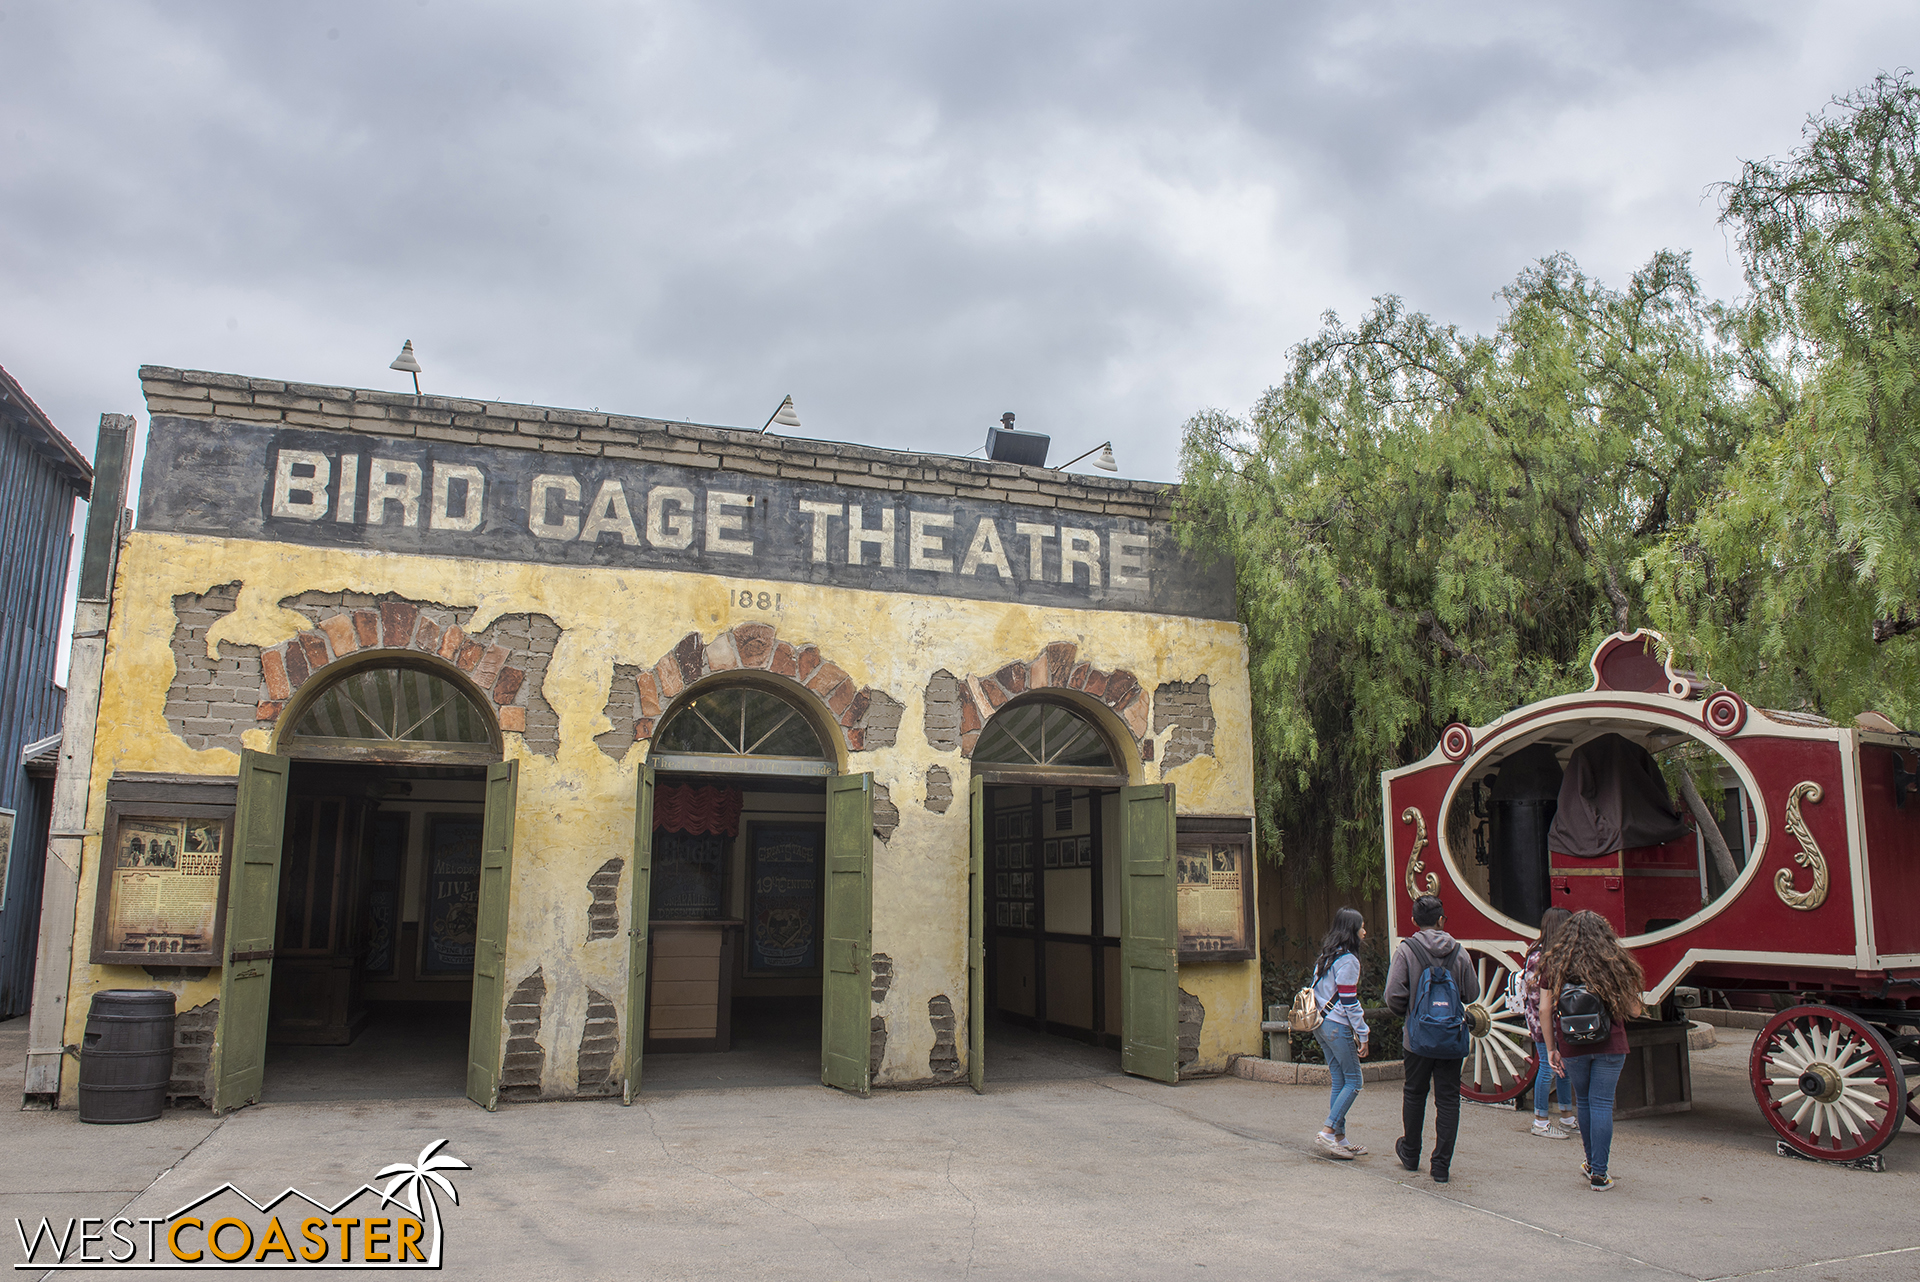  The Bird Cage Theater is home to a park show and is not directly involved with Ghost Town Alive!, but it factors into the lore. 